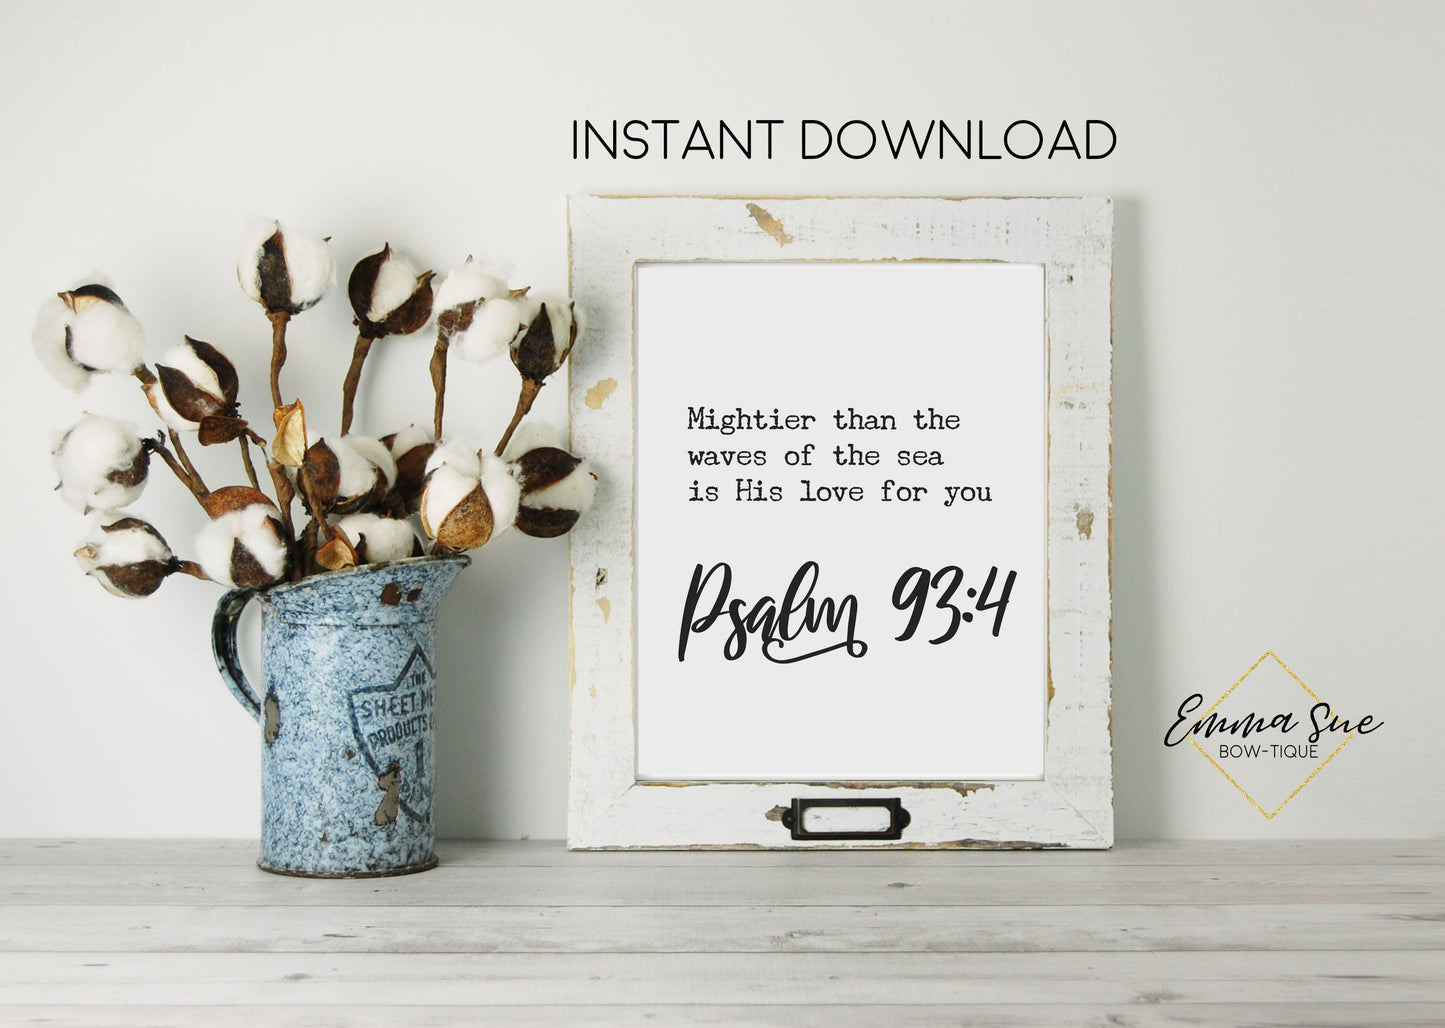 Mightier than the waves of the sea is His love for you Psalm 93:4 Bible Verse Farmhouse Printable Art Sign